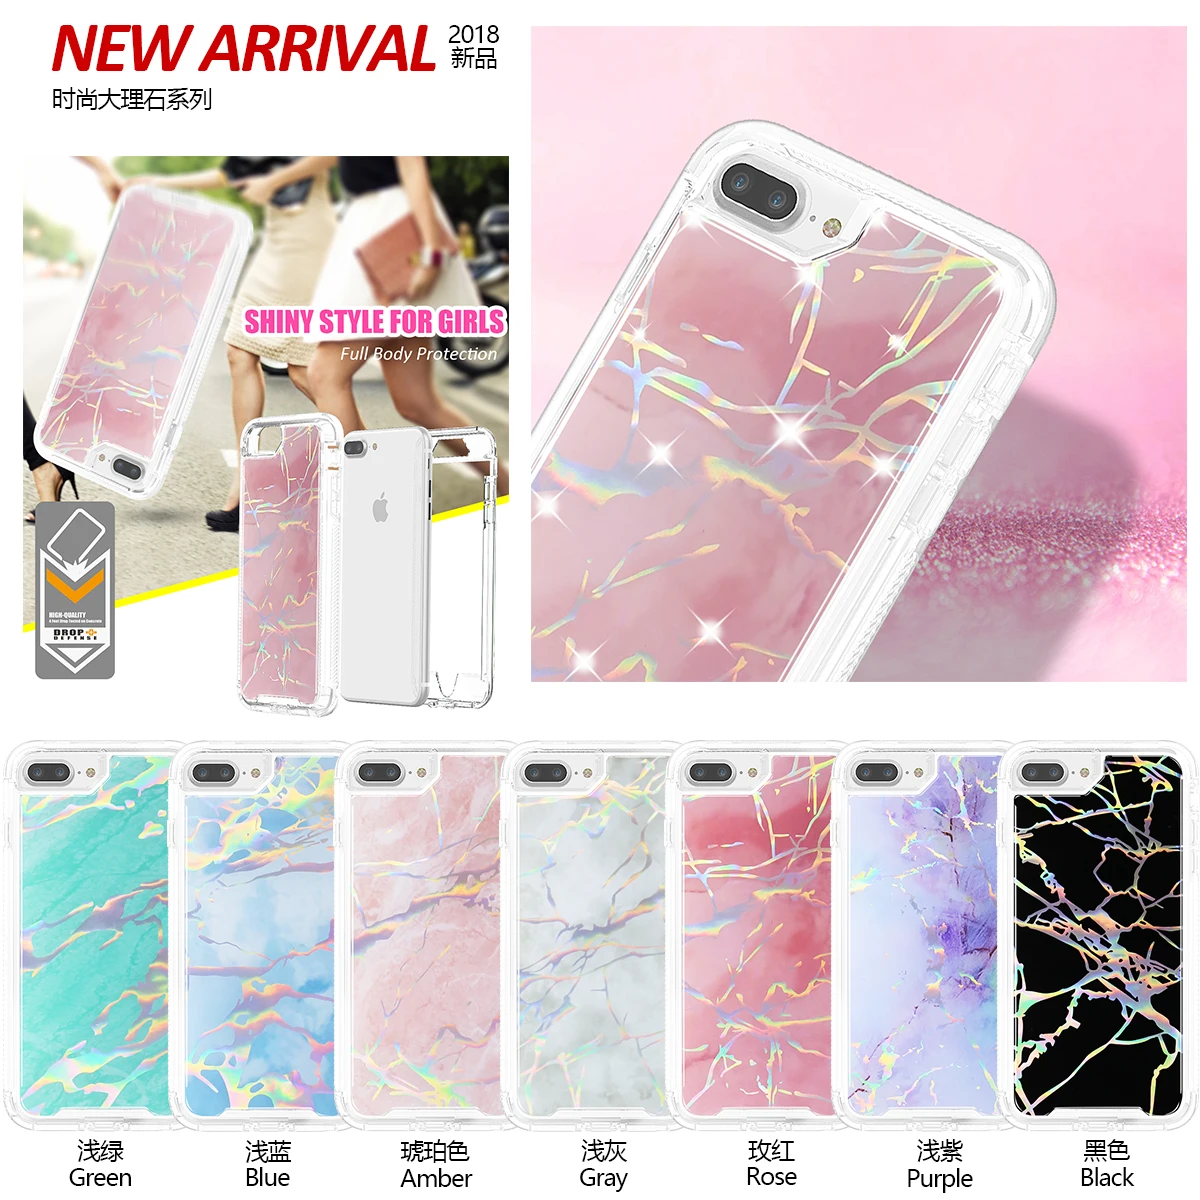 Candy-colored transparent shell with rounded edges for iPhone – Paprikase